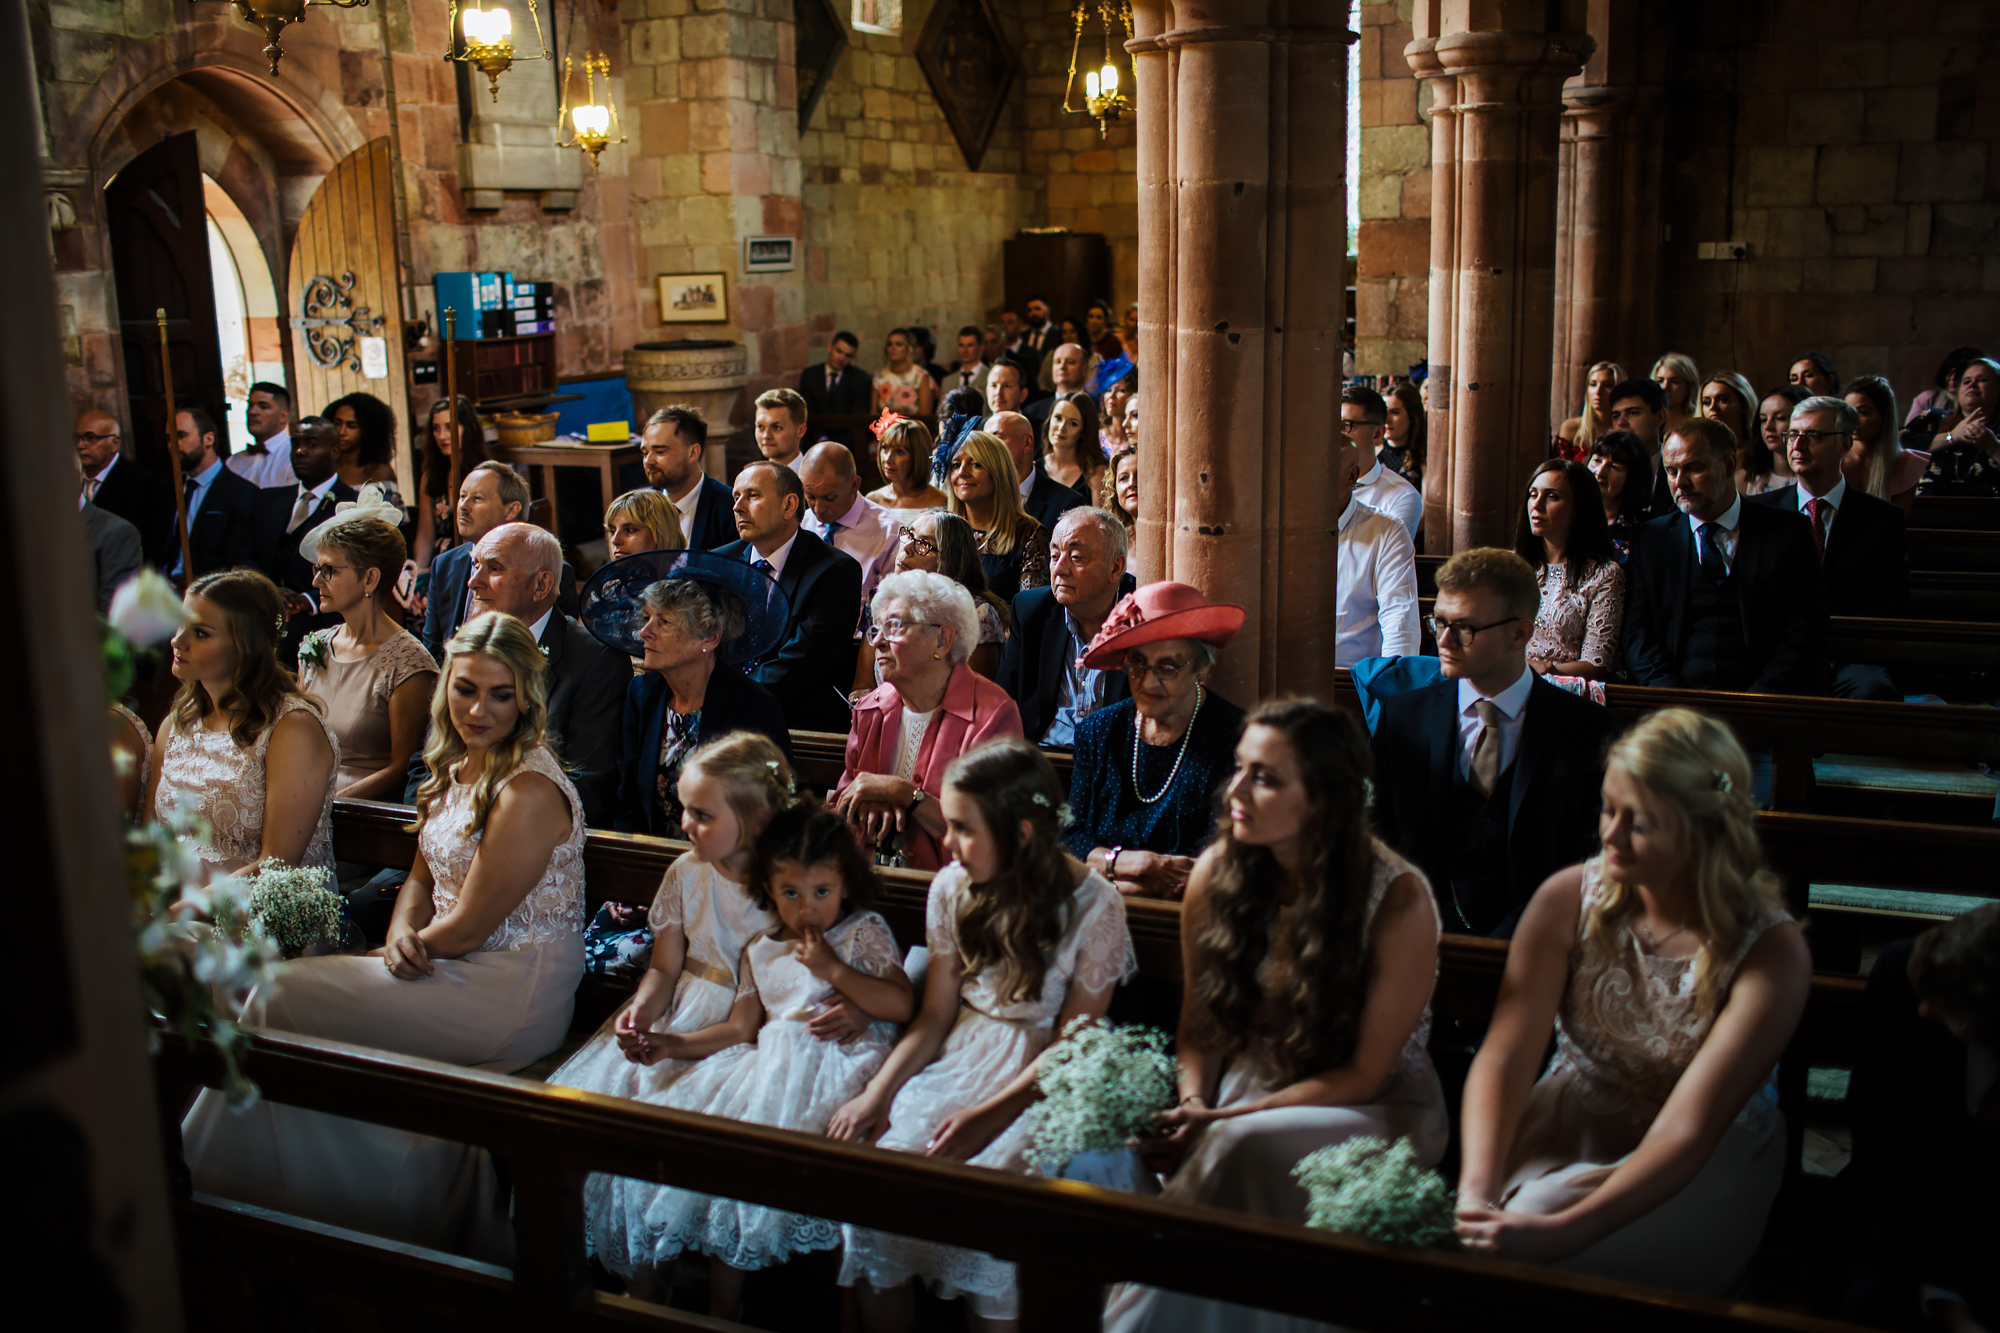 Wedding guests and bridesmaids in the church